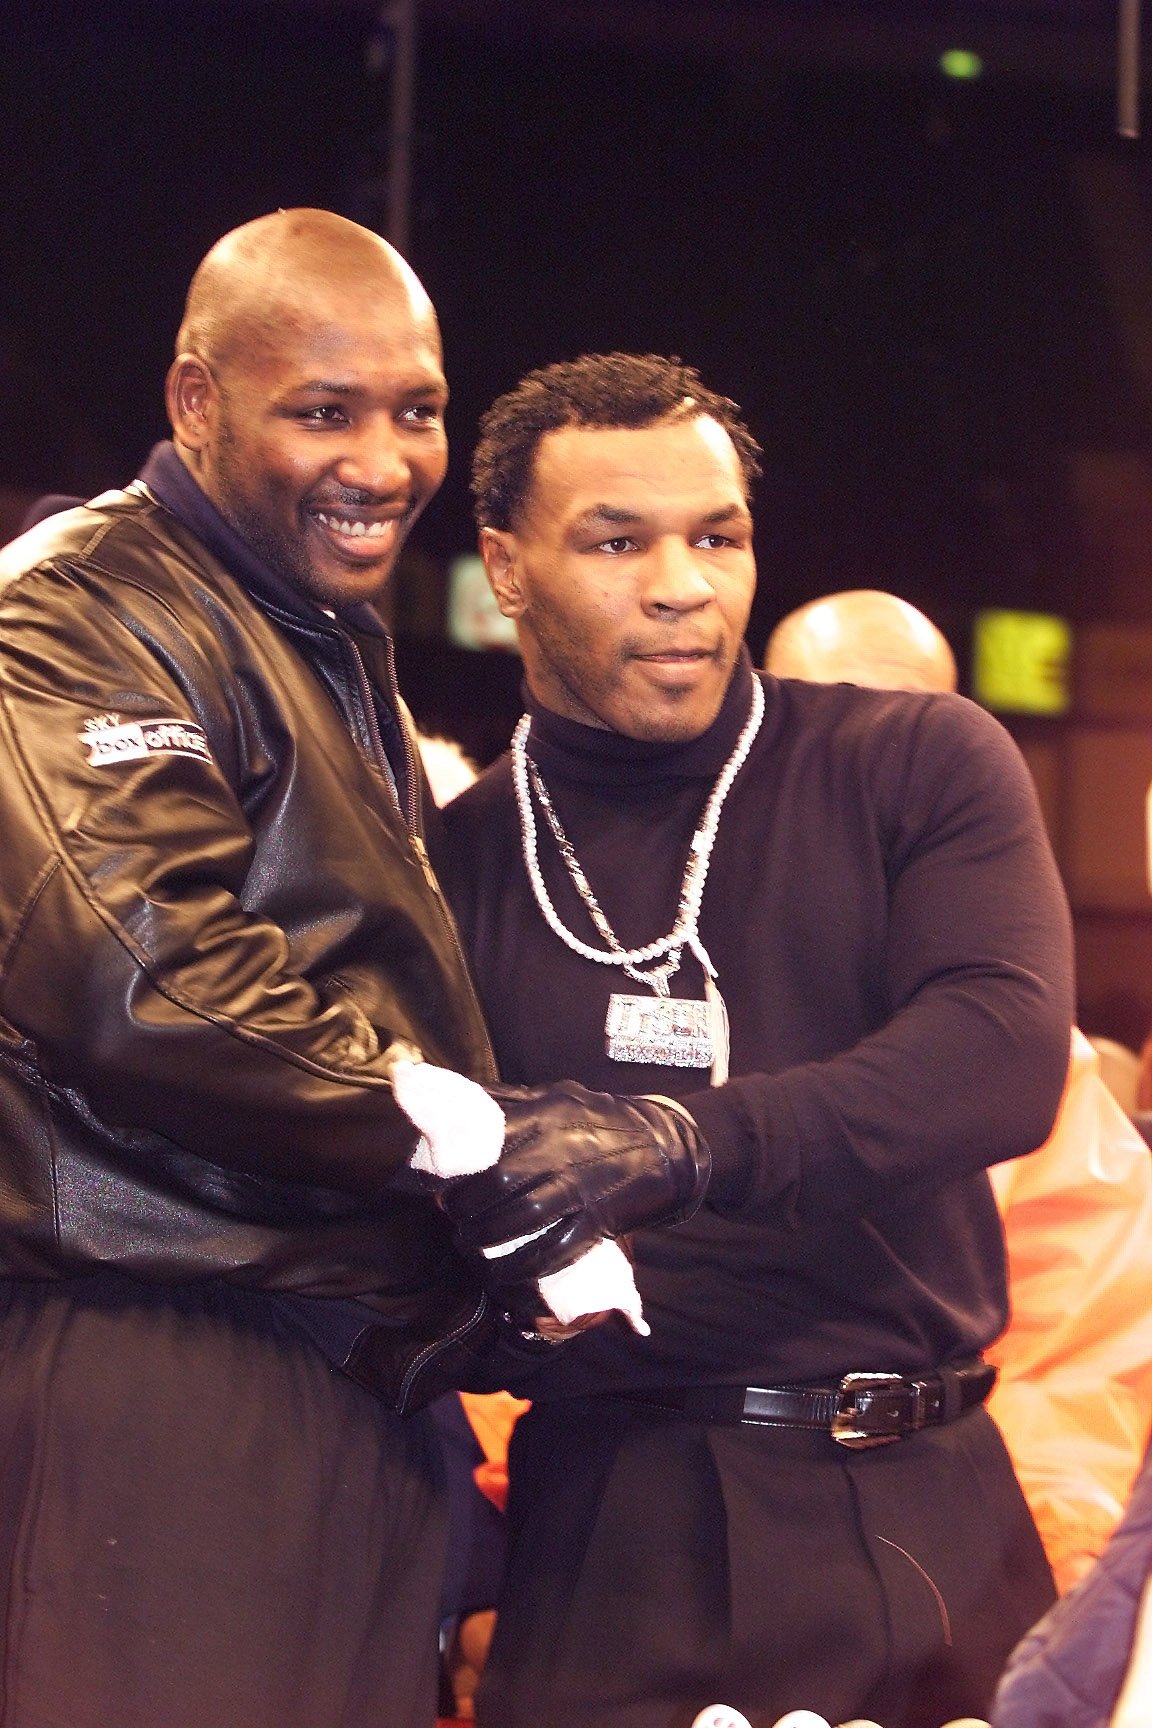 Ex-heavyweight Julius Francis, who fought Mike Tyson, 'appreciates support'.